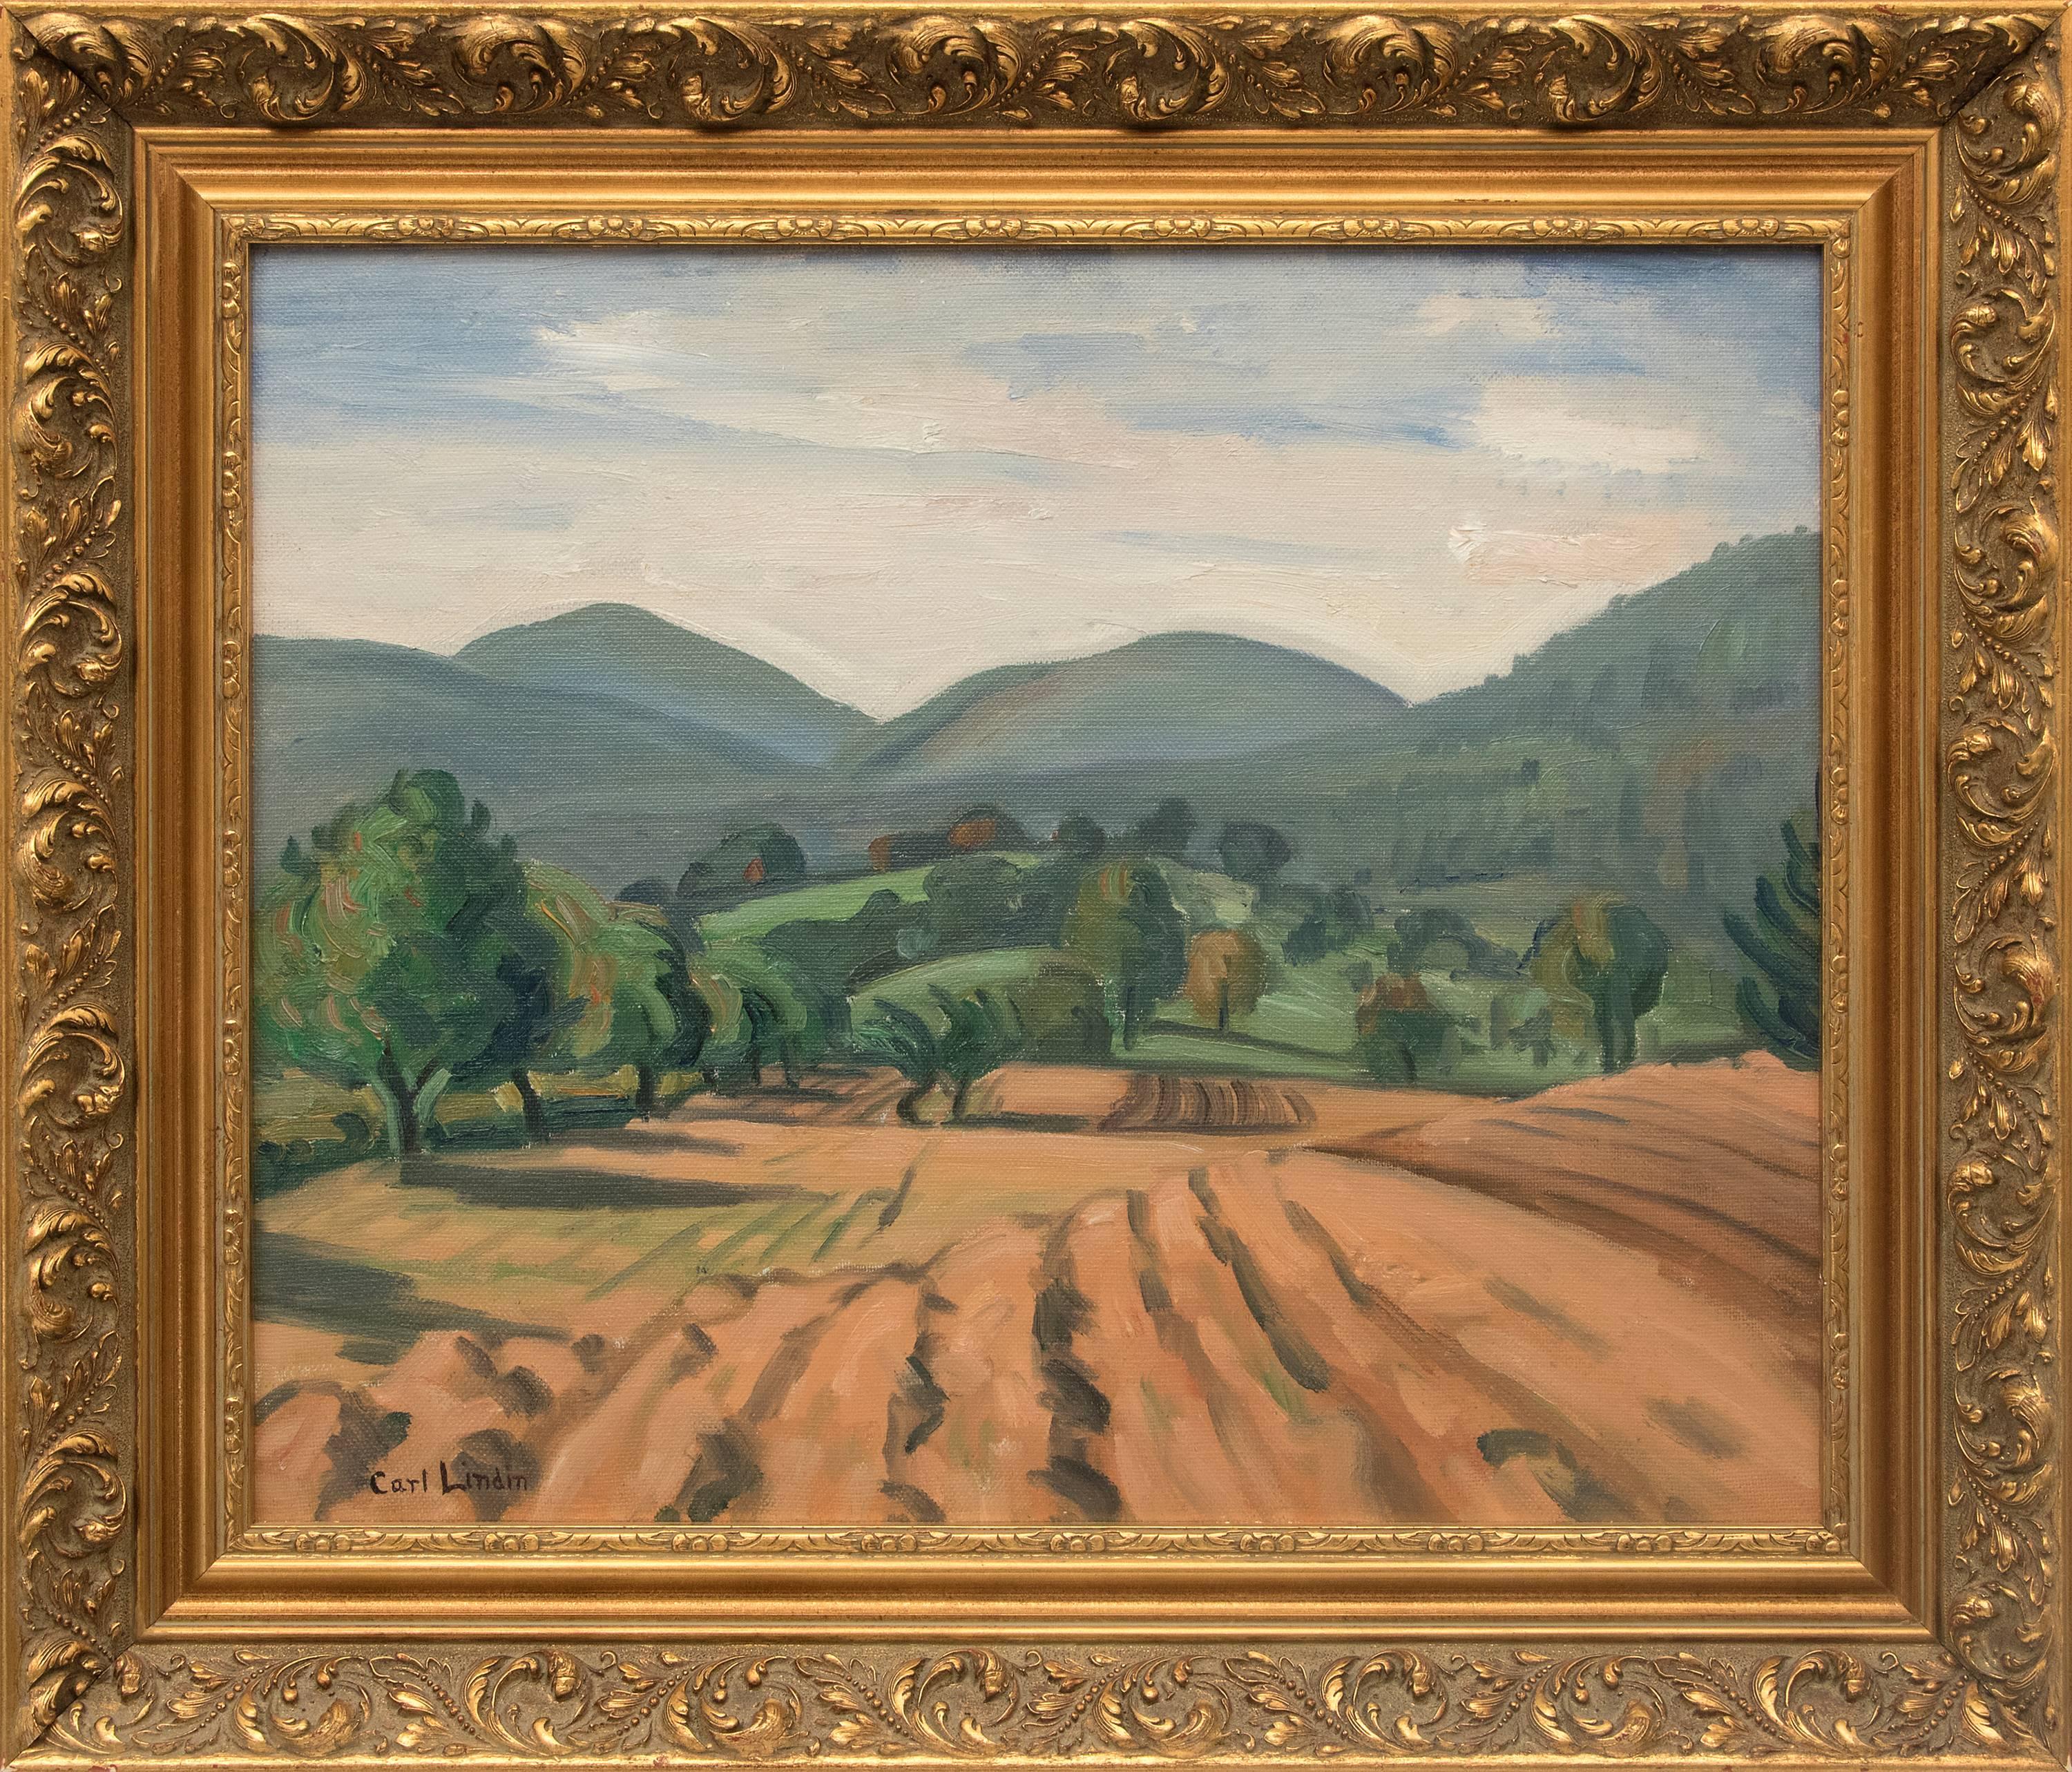 An original signed landscape oil painting of Ojai, California from the 1920s by Swedish-American artist, Carl Lindin.   Presented in a custom frame, outer dimensions measure 23 ½ x 27 ½ x 2 inches.  Image size is 18 x 22 inches.
Provenance: Estate